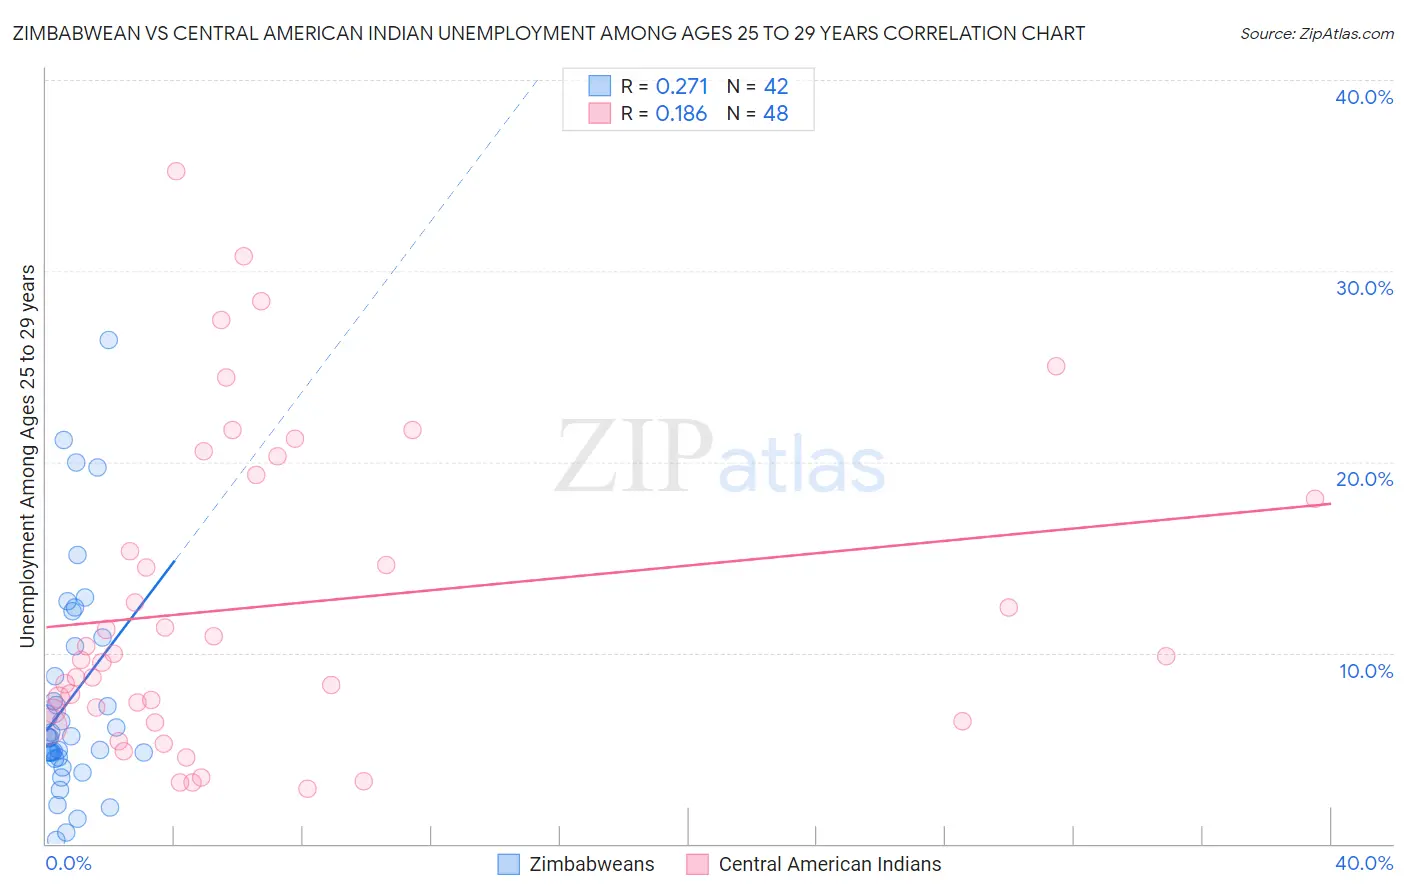 Zimbabwean vs Central American Indian Unemployment Among Ages 25 to 29 years